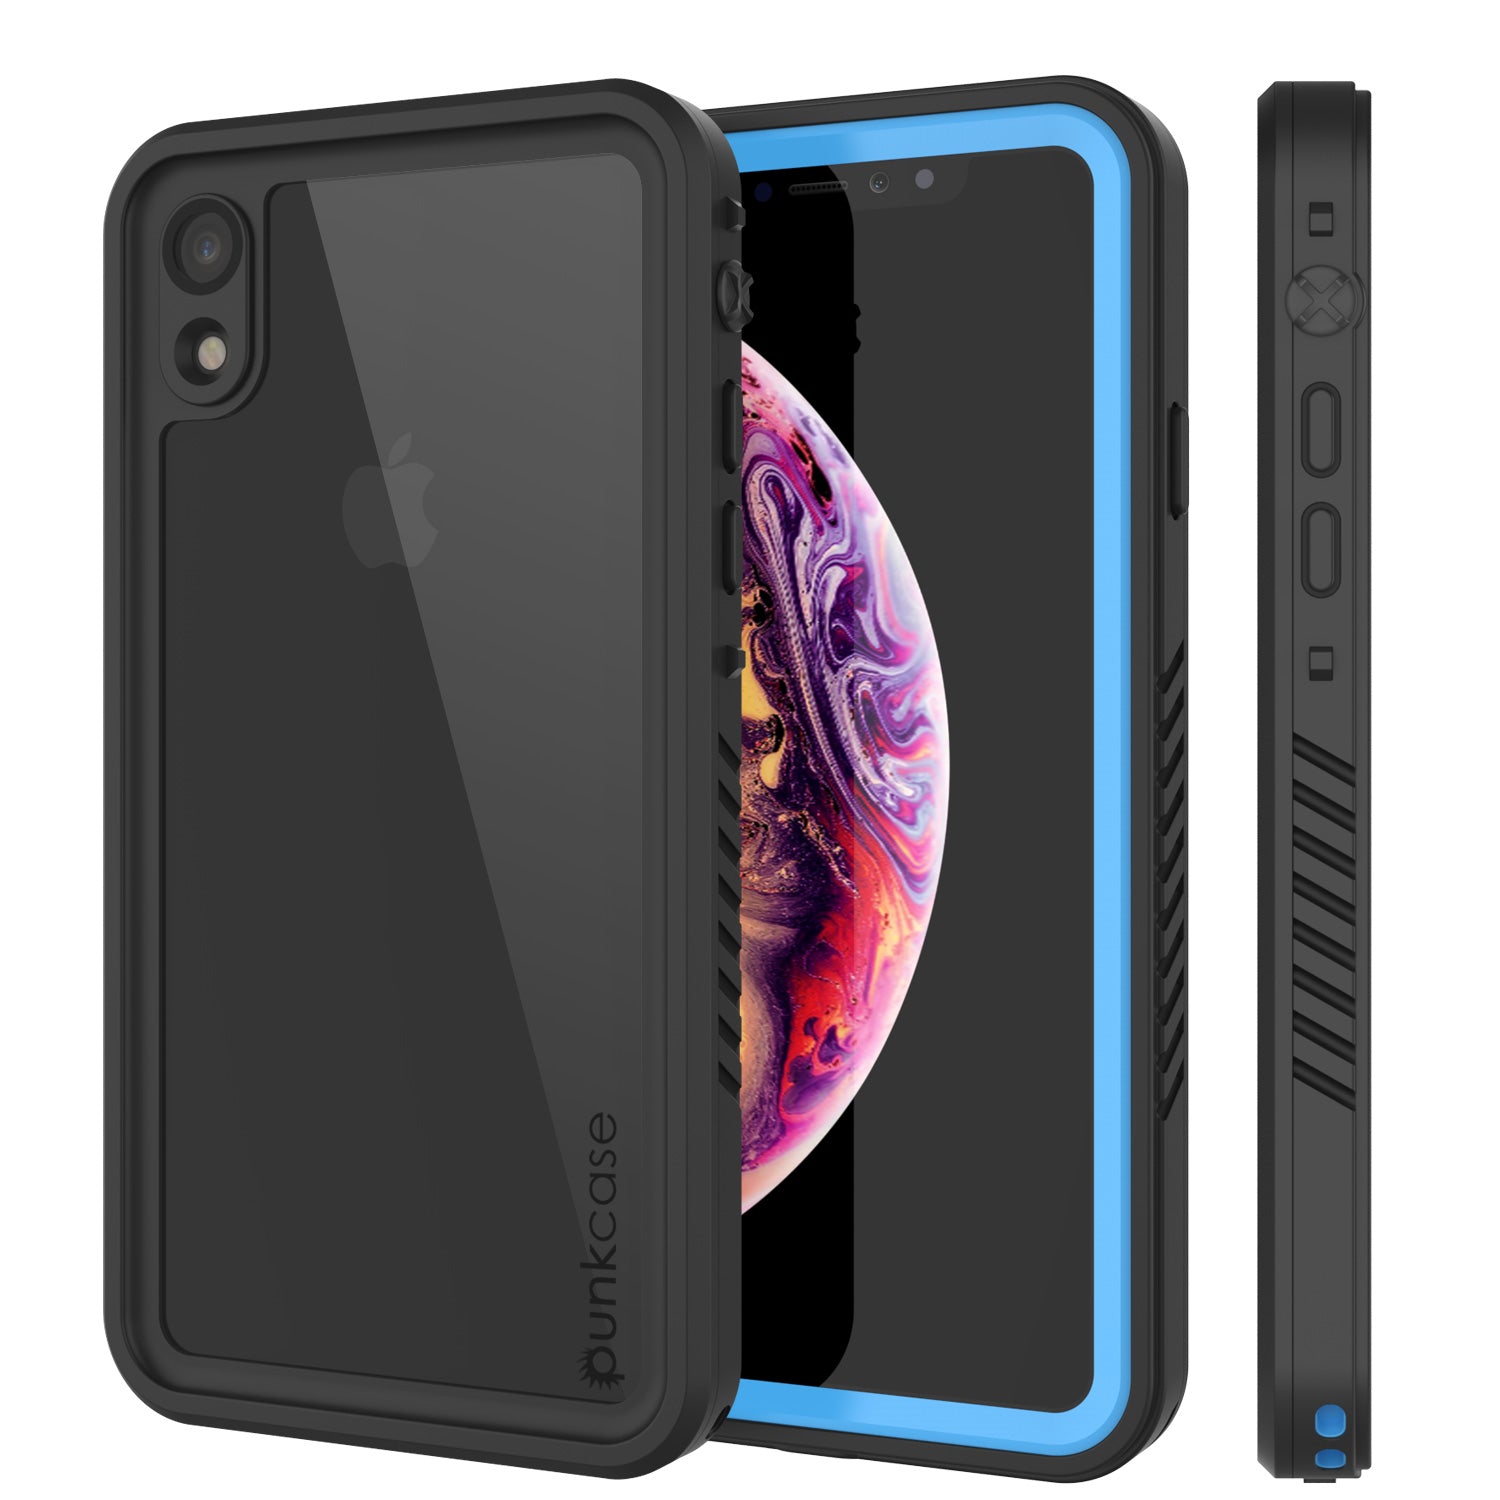 iPhone XR Waterproof Case, Punkcase [Extreme Series] Armor Cover